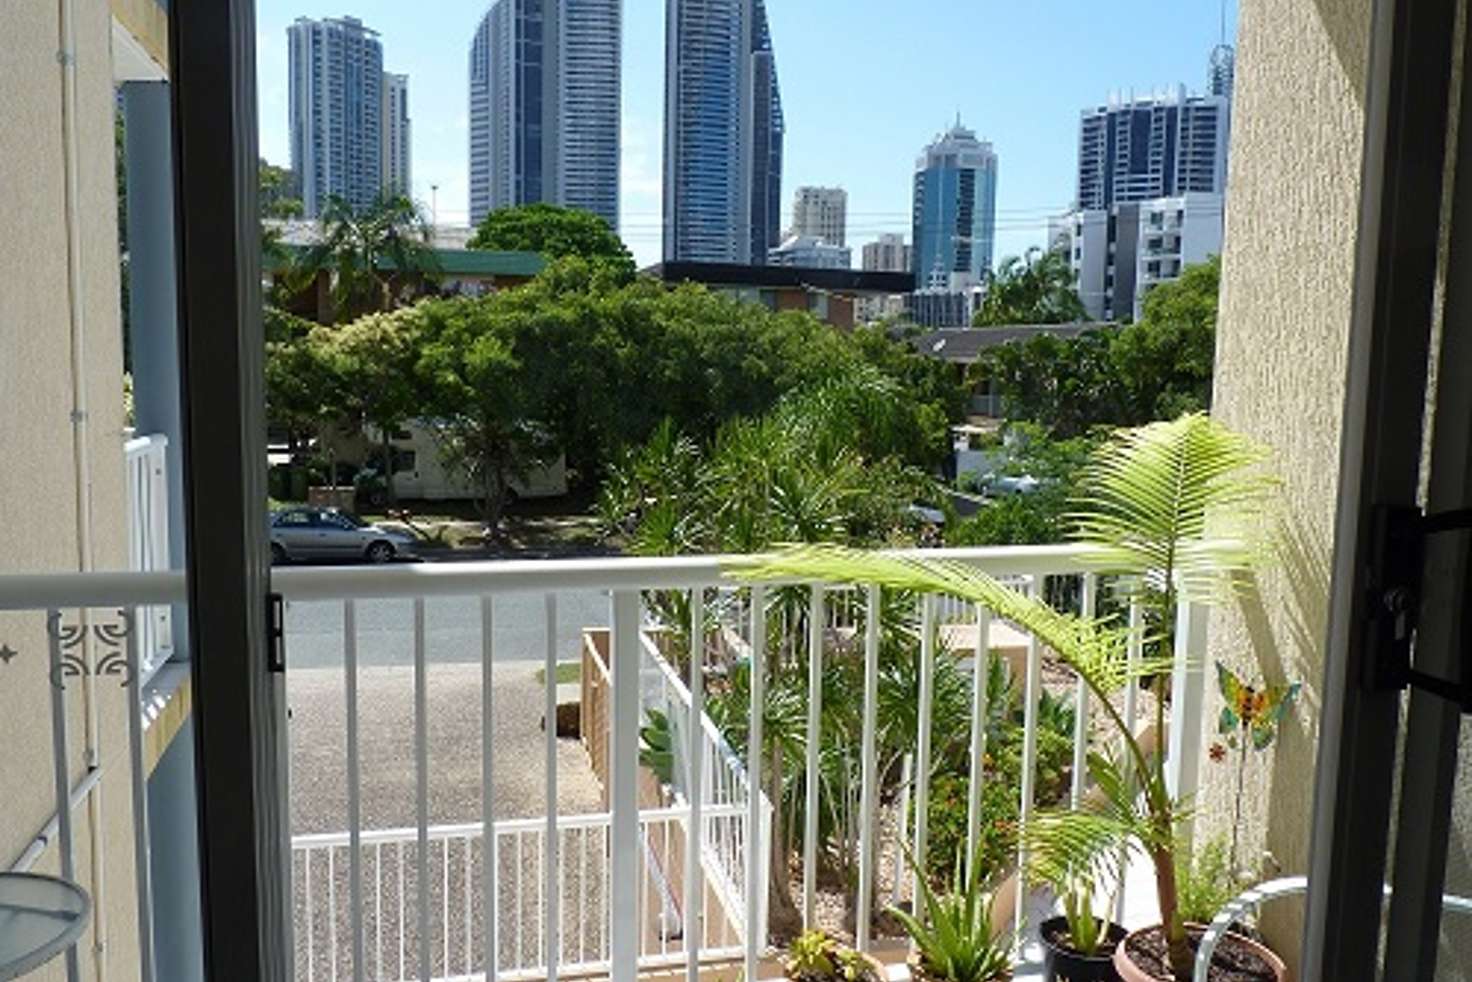 Main view of Homely apartment listing, 10/14-16 Darrambal Street, Chevron Island QLD 4217